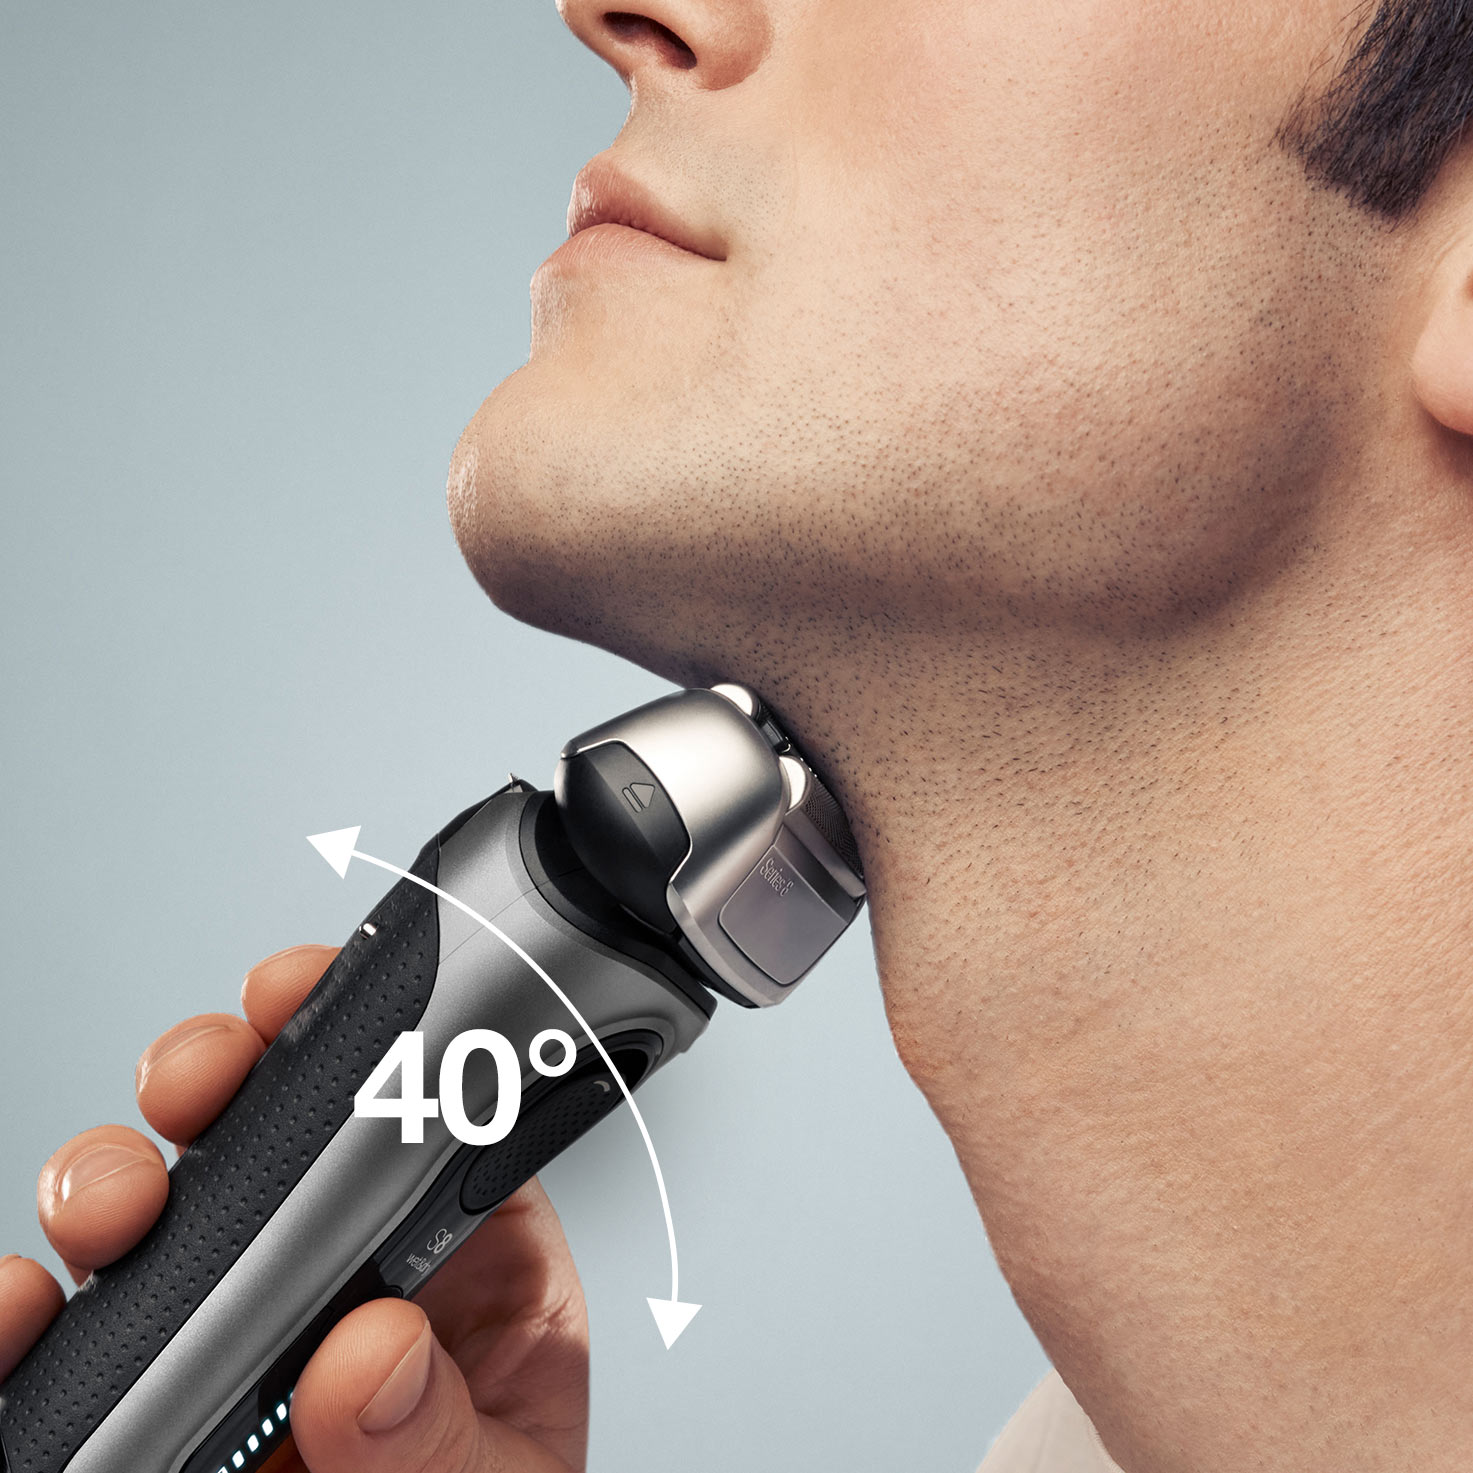 Series 8 8467cc Wet & Dry shaver with 5-in-1 SmartCare center and